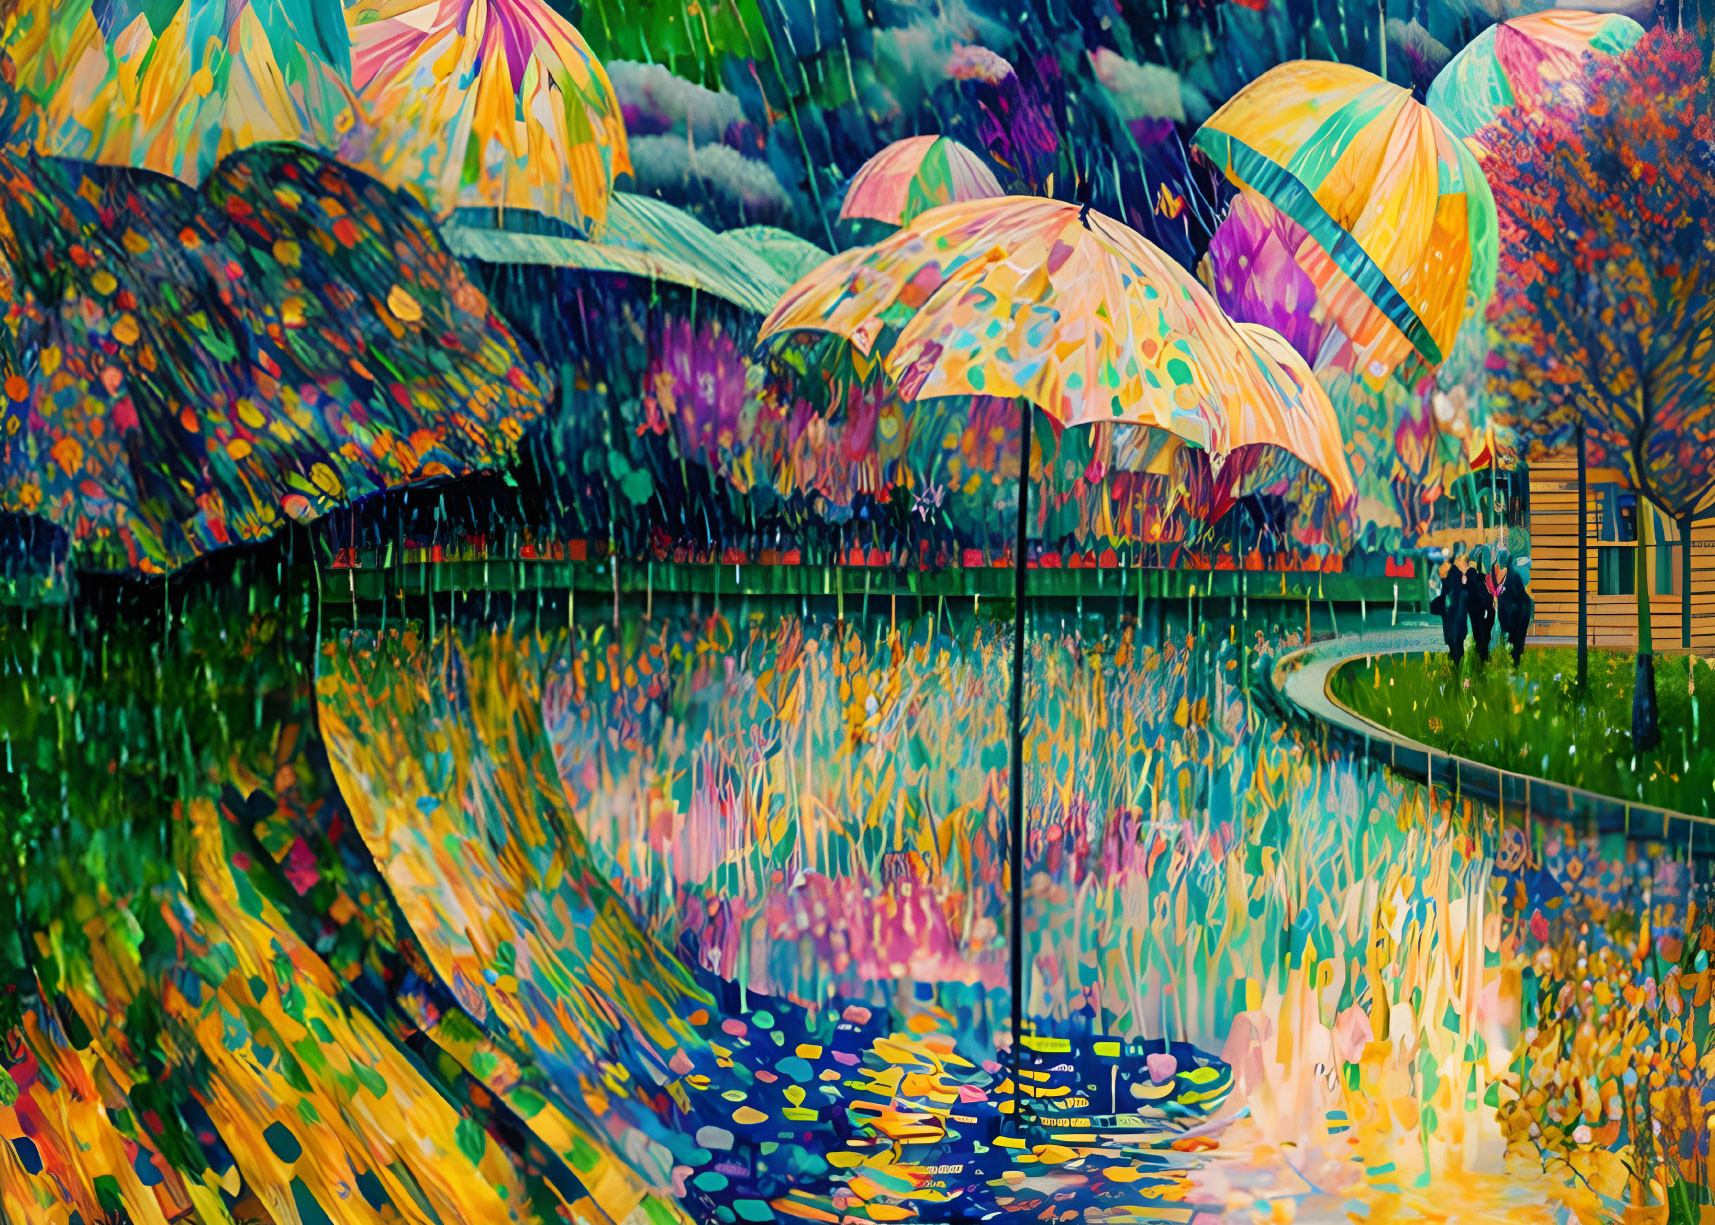 Impressionist-style painting of people with umbrellas by a reflective water body